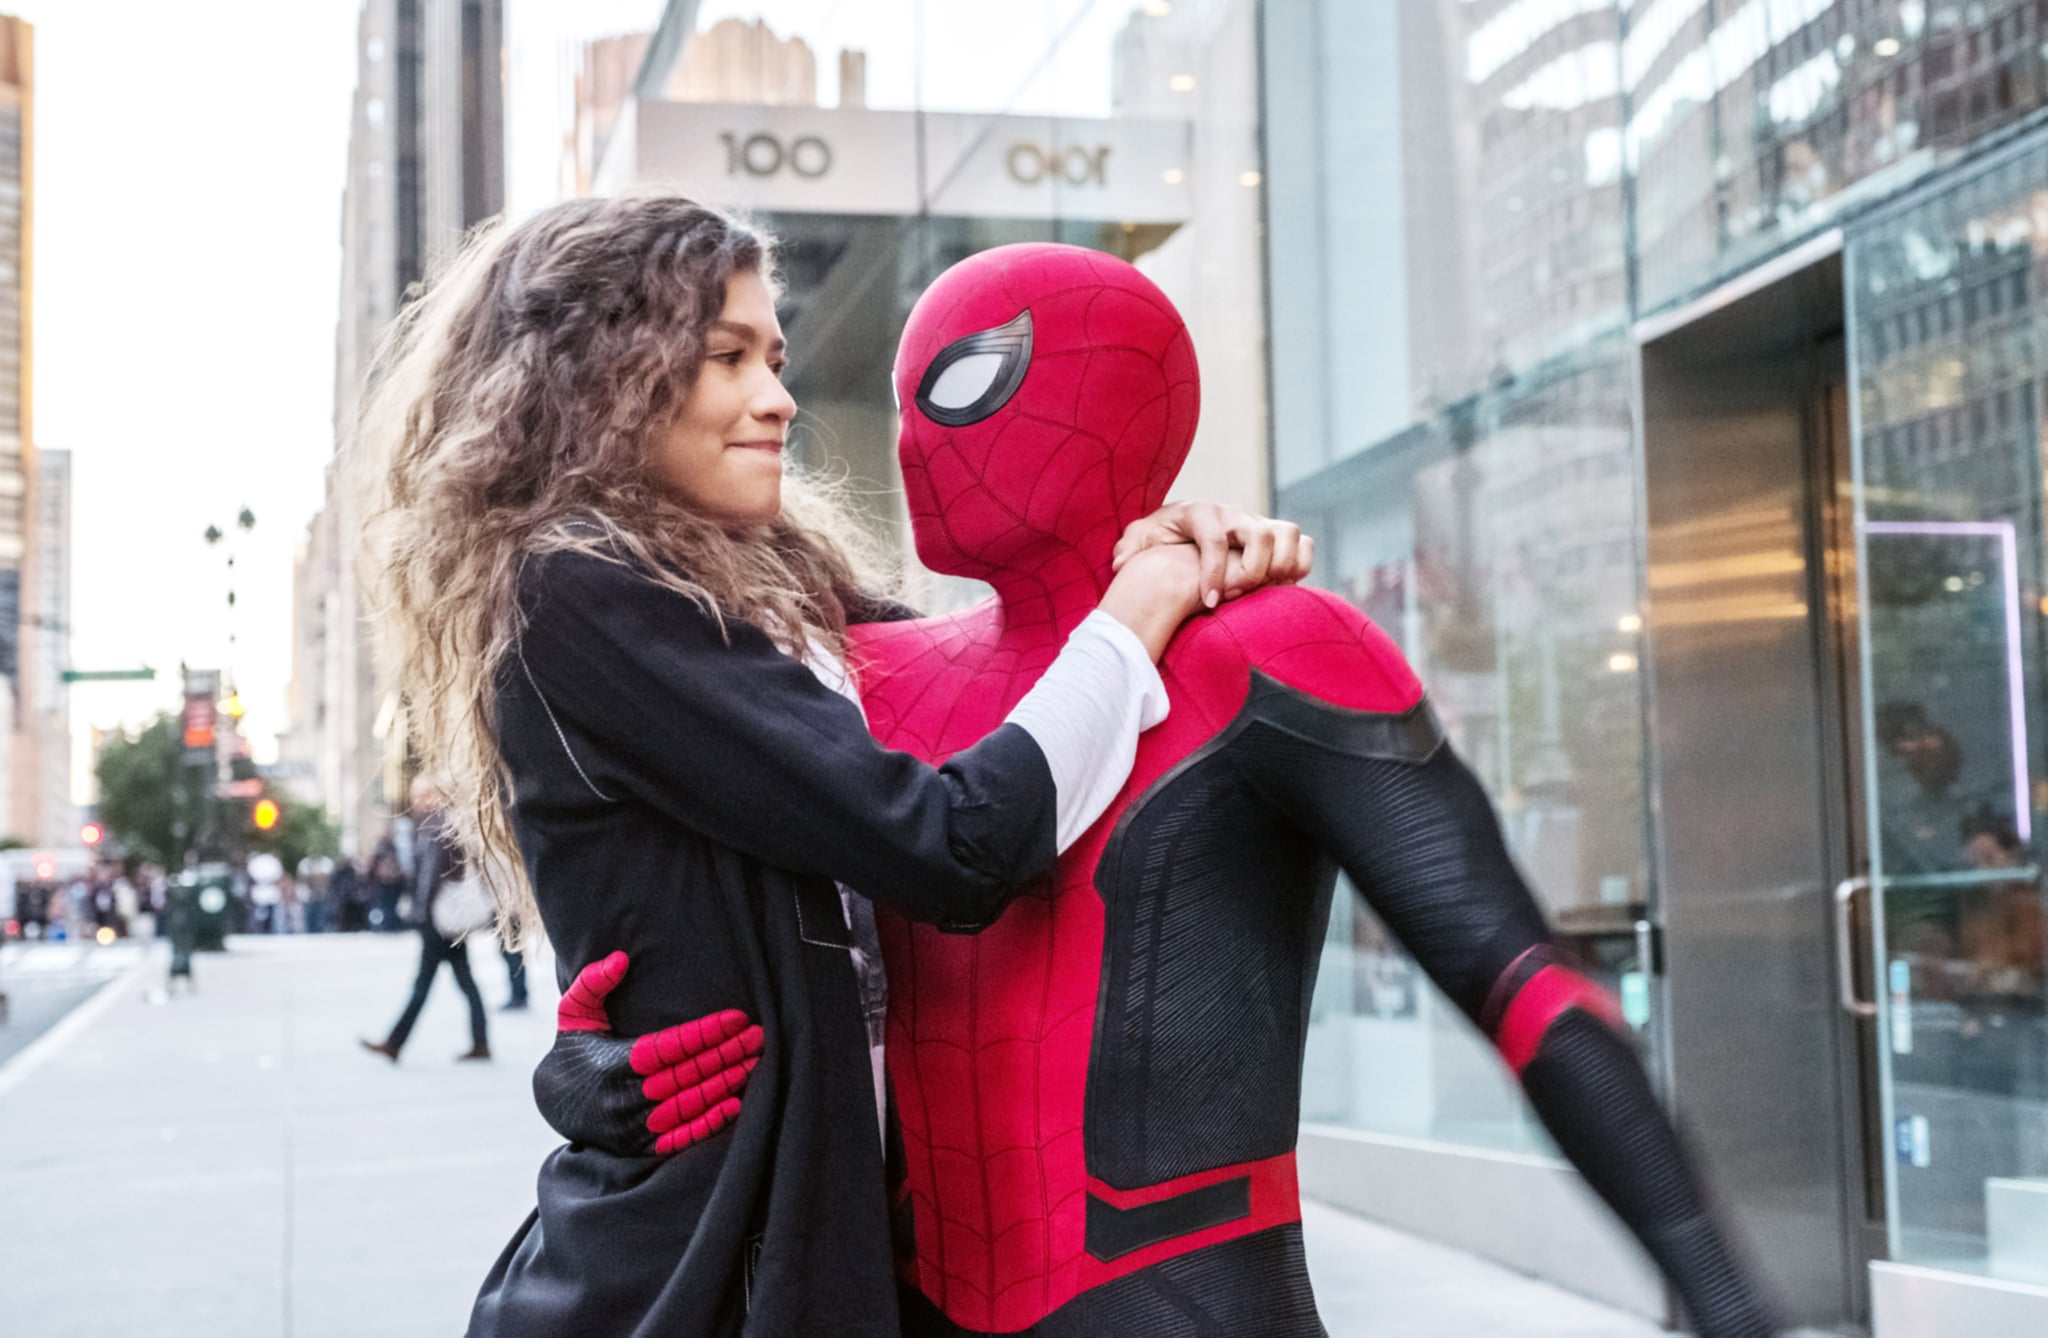 SPIDER-MAN: FAR FROM HOME, from left: Zendaya, Tom Holland as Spider-Man / Peter Parker, 2019. ph: JoJo Whilden /  Columbia Pictures /  Marvel / courtesy Everett Collection